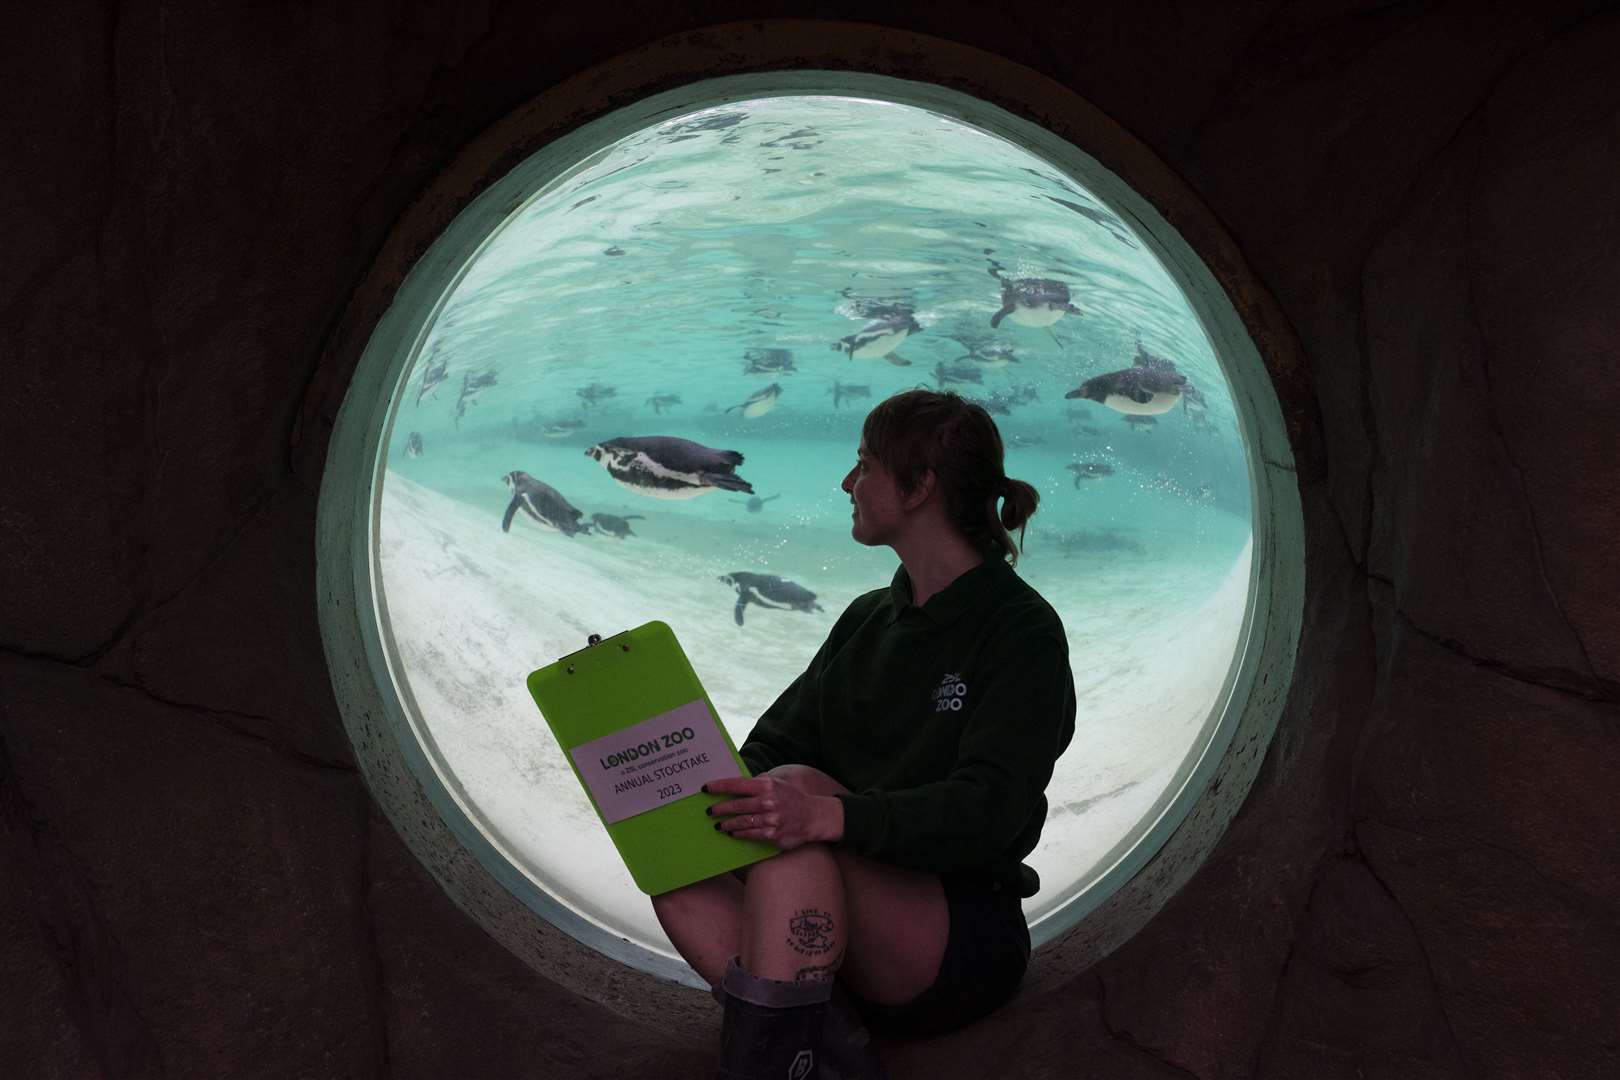 Humboldt penguins are counted at the zoo (Kirsty O’Connor/PA)